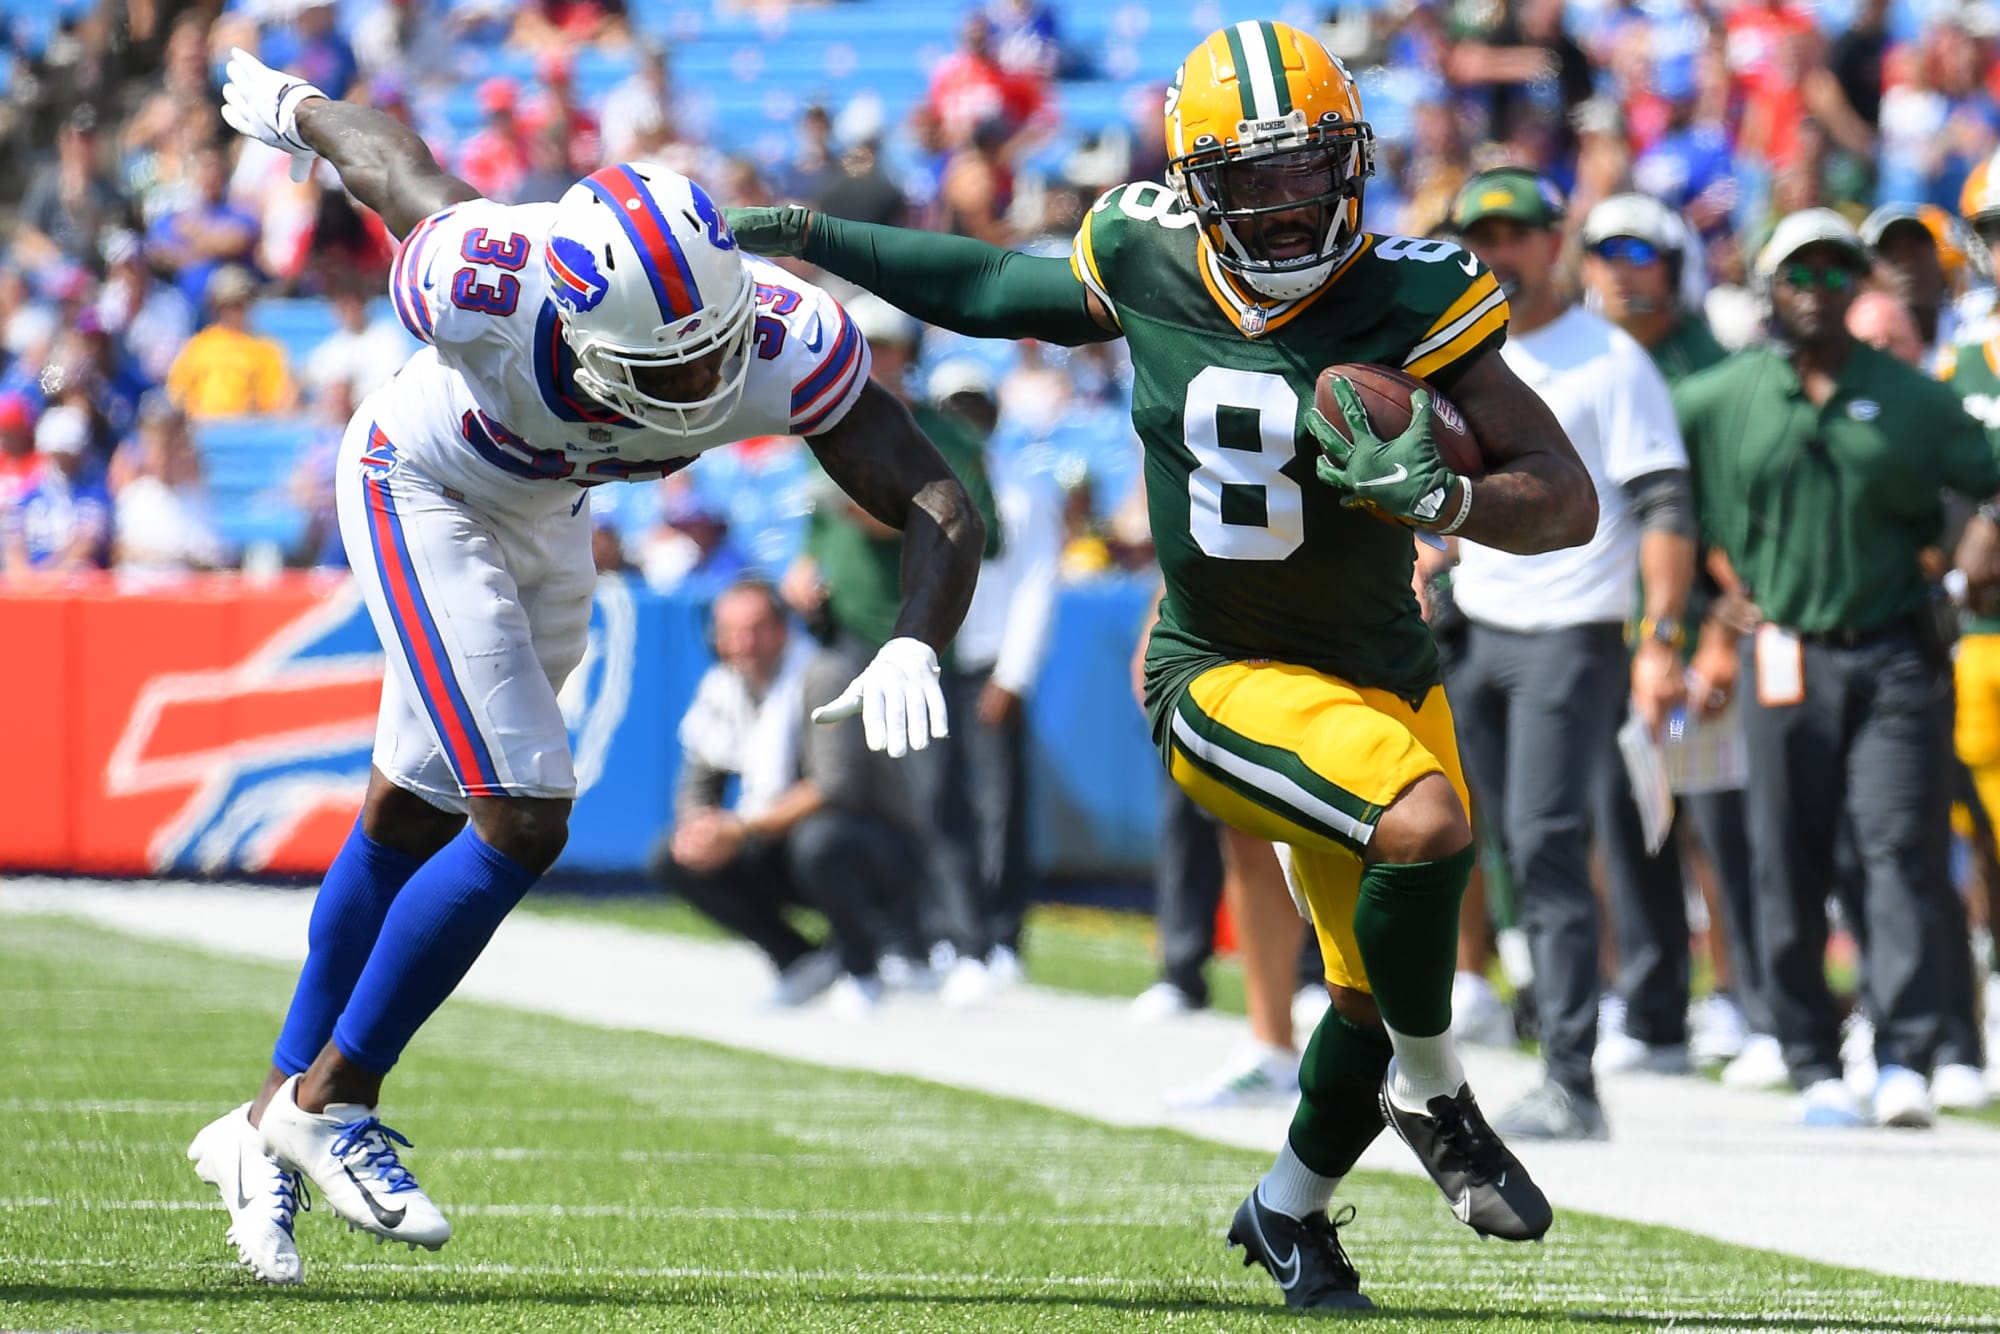 Amari Rodgers gives a nice stiff arm in a preseason game against the Bills